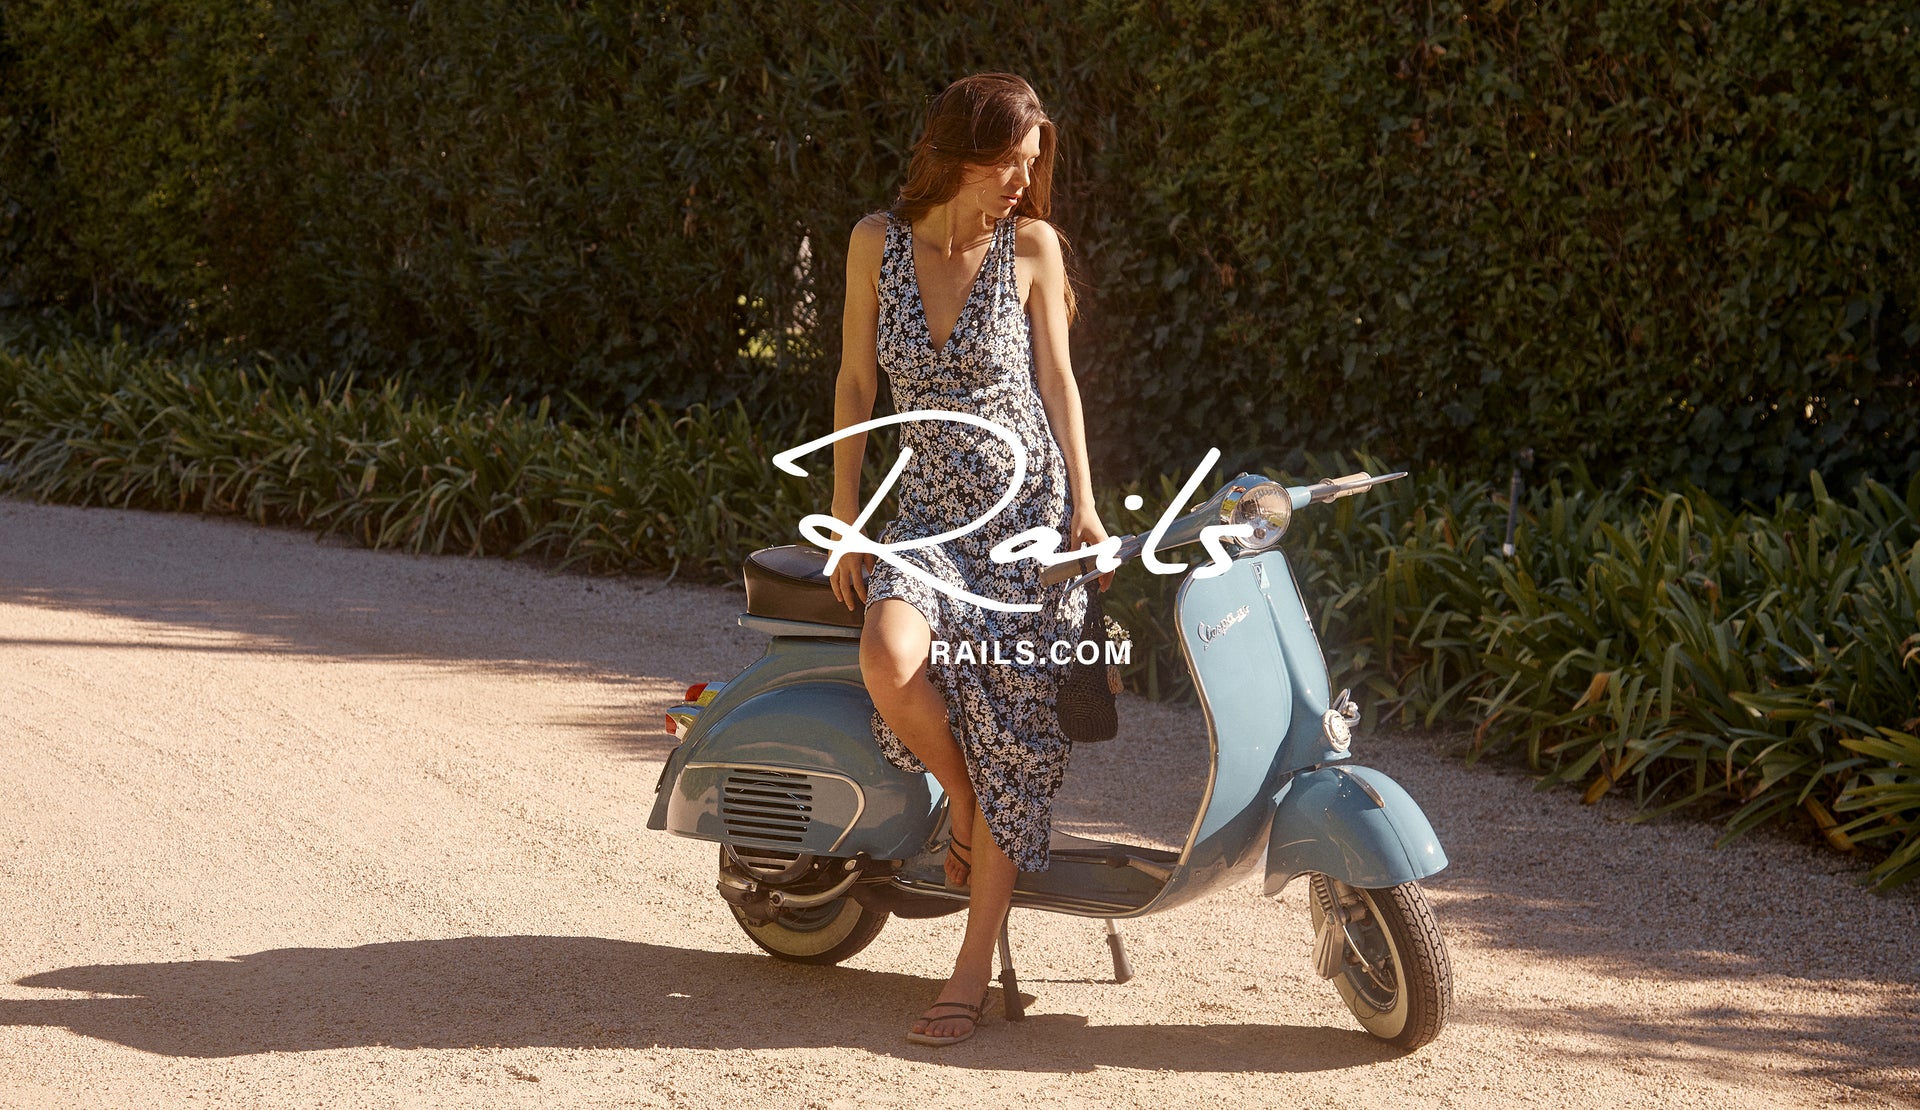 FRONT FULL BODY EDITORIAL IMAGE OF MODEL ON VESPA WEARING AUDRINA DRESS